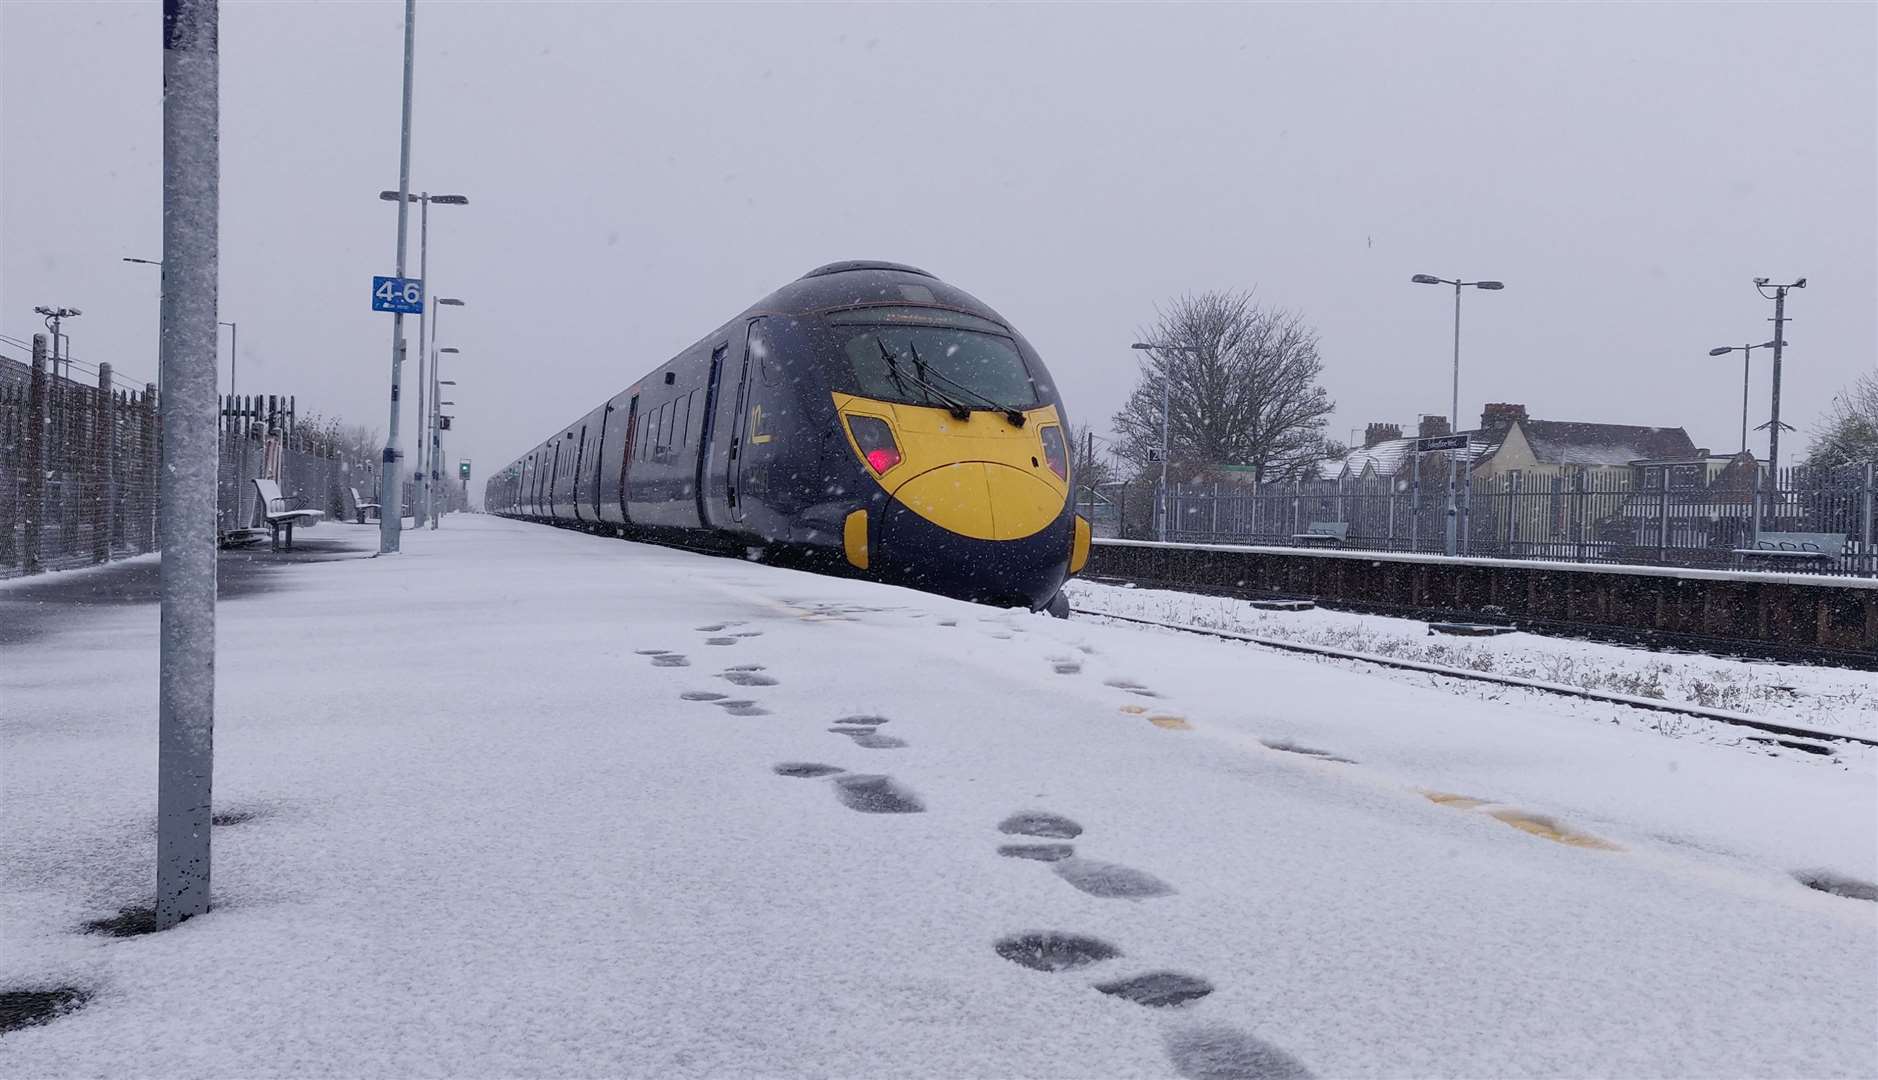 Snowy conditions at Folkestone West railway station on Sunday. Picture: Rhys Griffiths